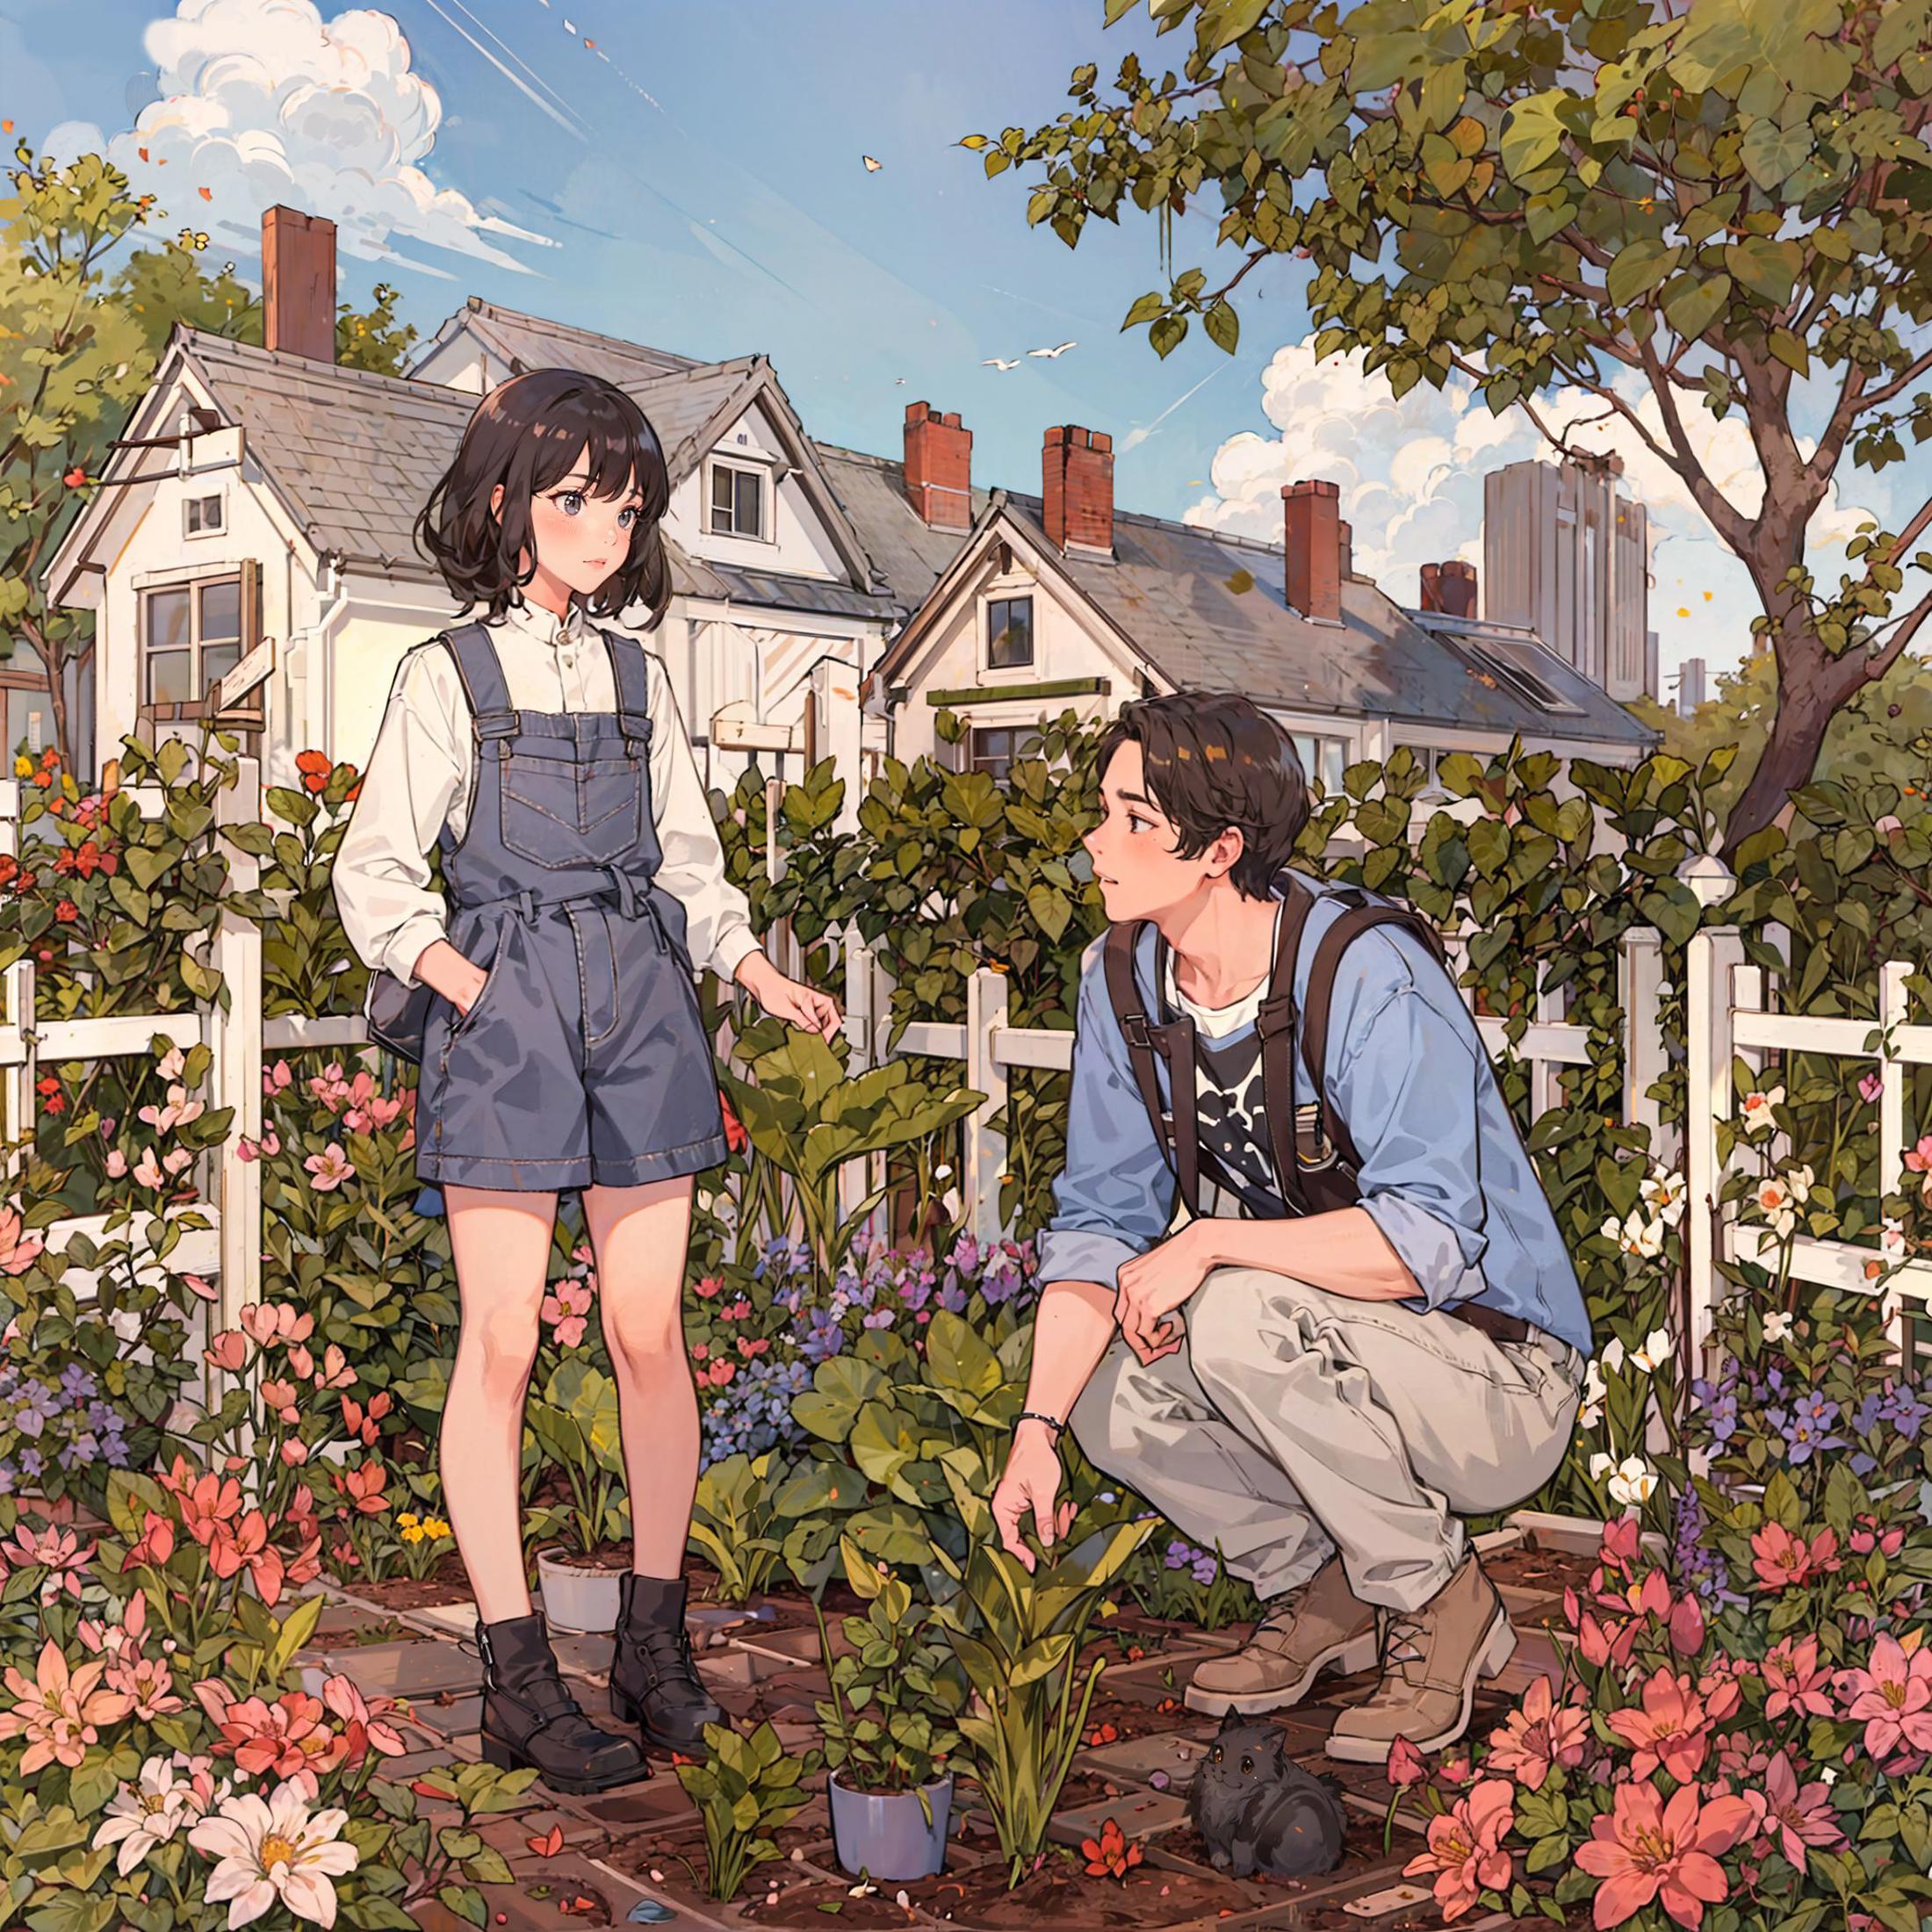 A boy and a girl tending to a garden together.